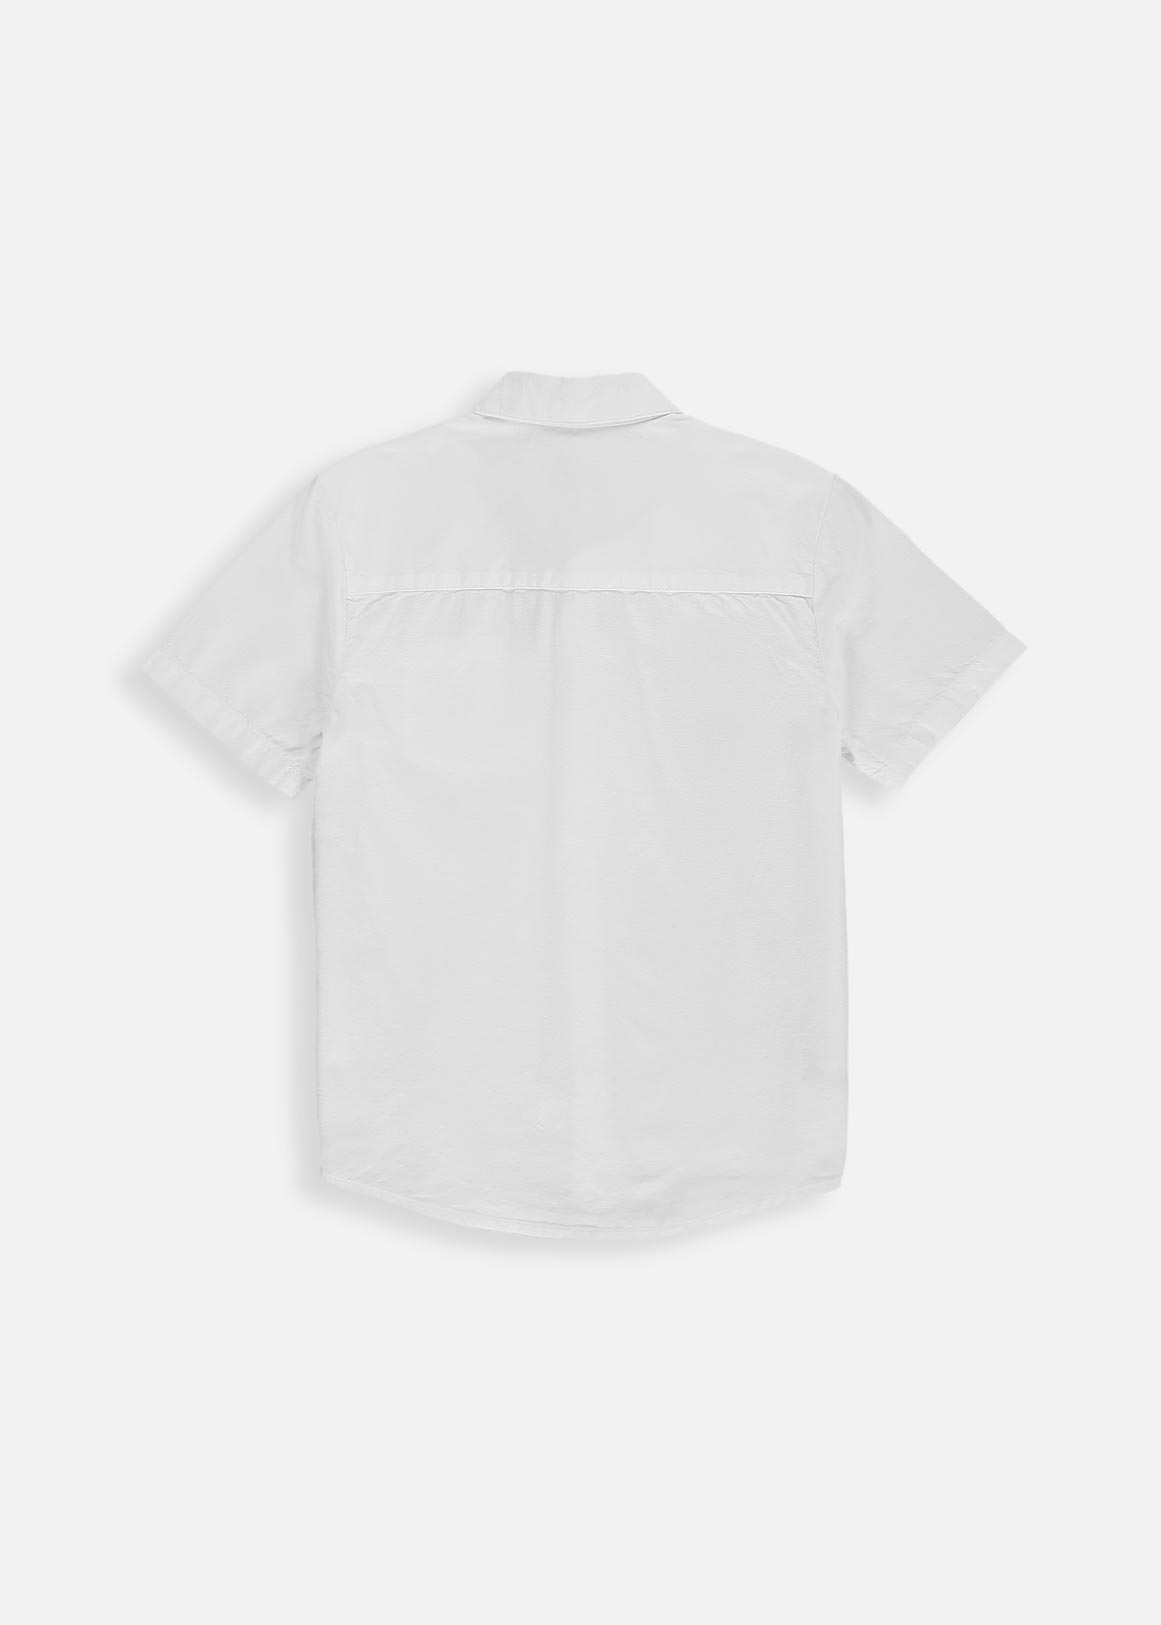 SS WHITE SHIRT S22 - Woolworths Mauritius Online